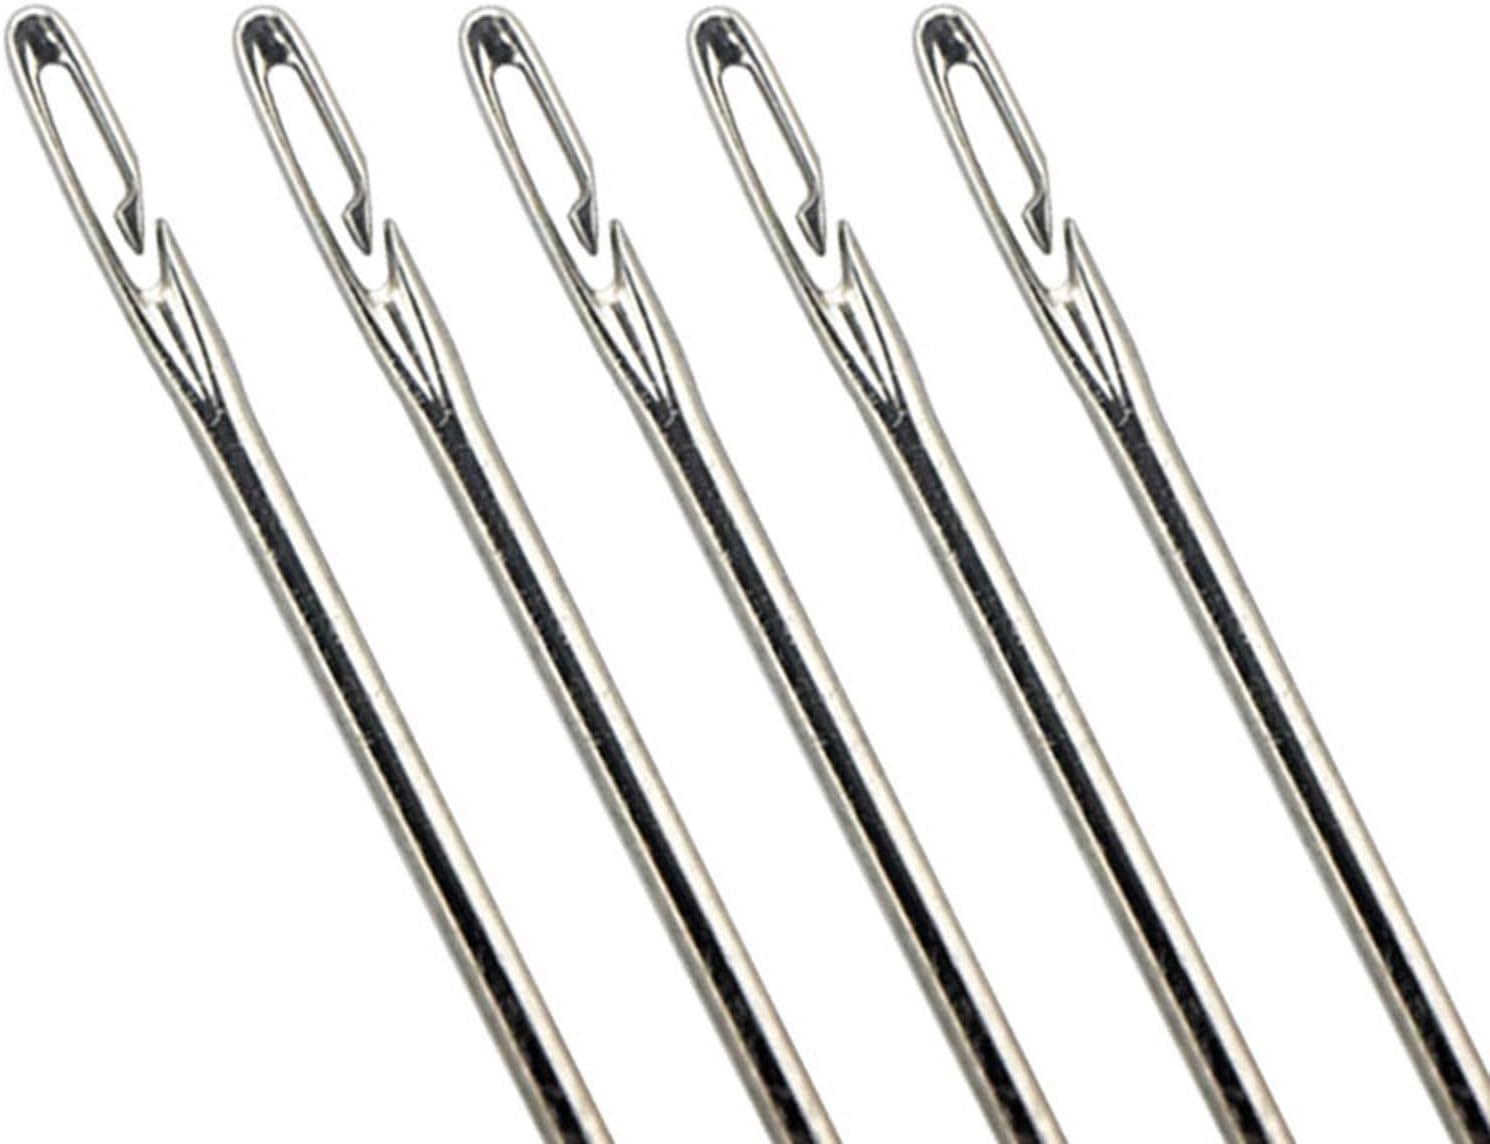 12pc Hand Sewing Needles Stainless Steel Self-Threading Silver